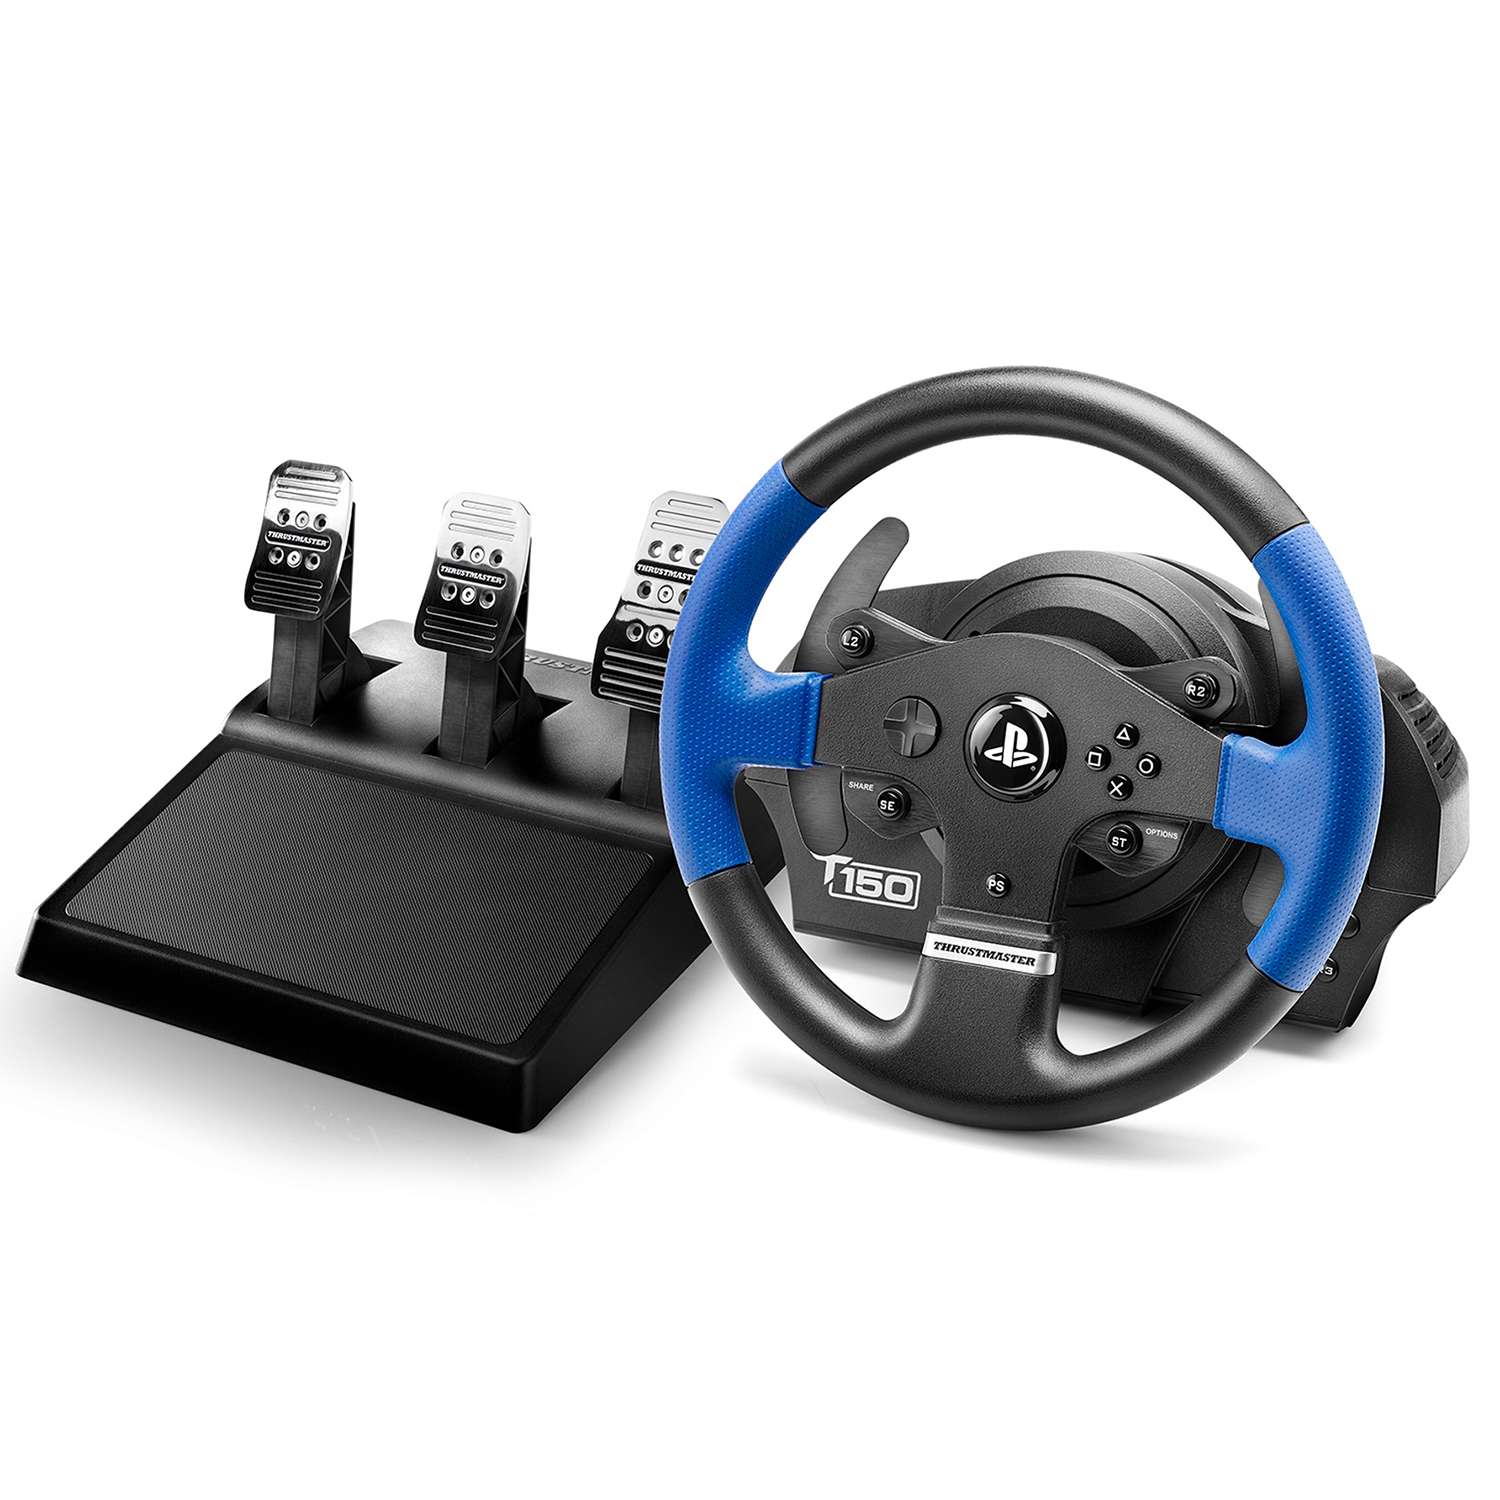 Руль Thrustmaster T150 RS EU PRO Version PS4/PS3/PC